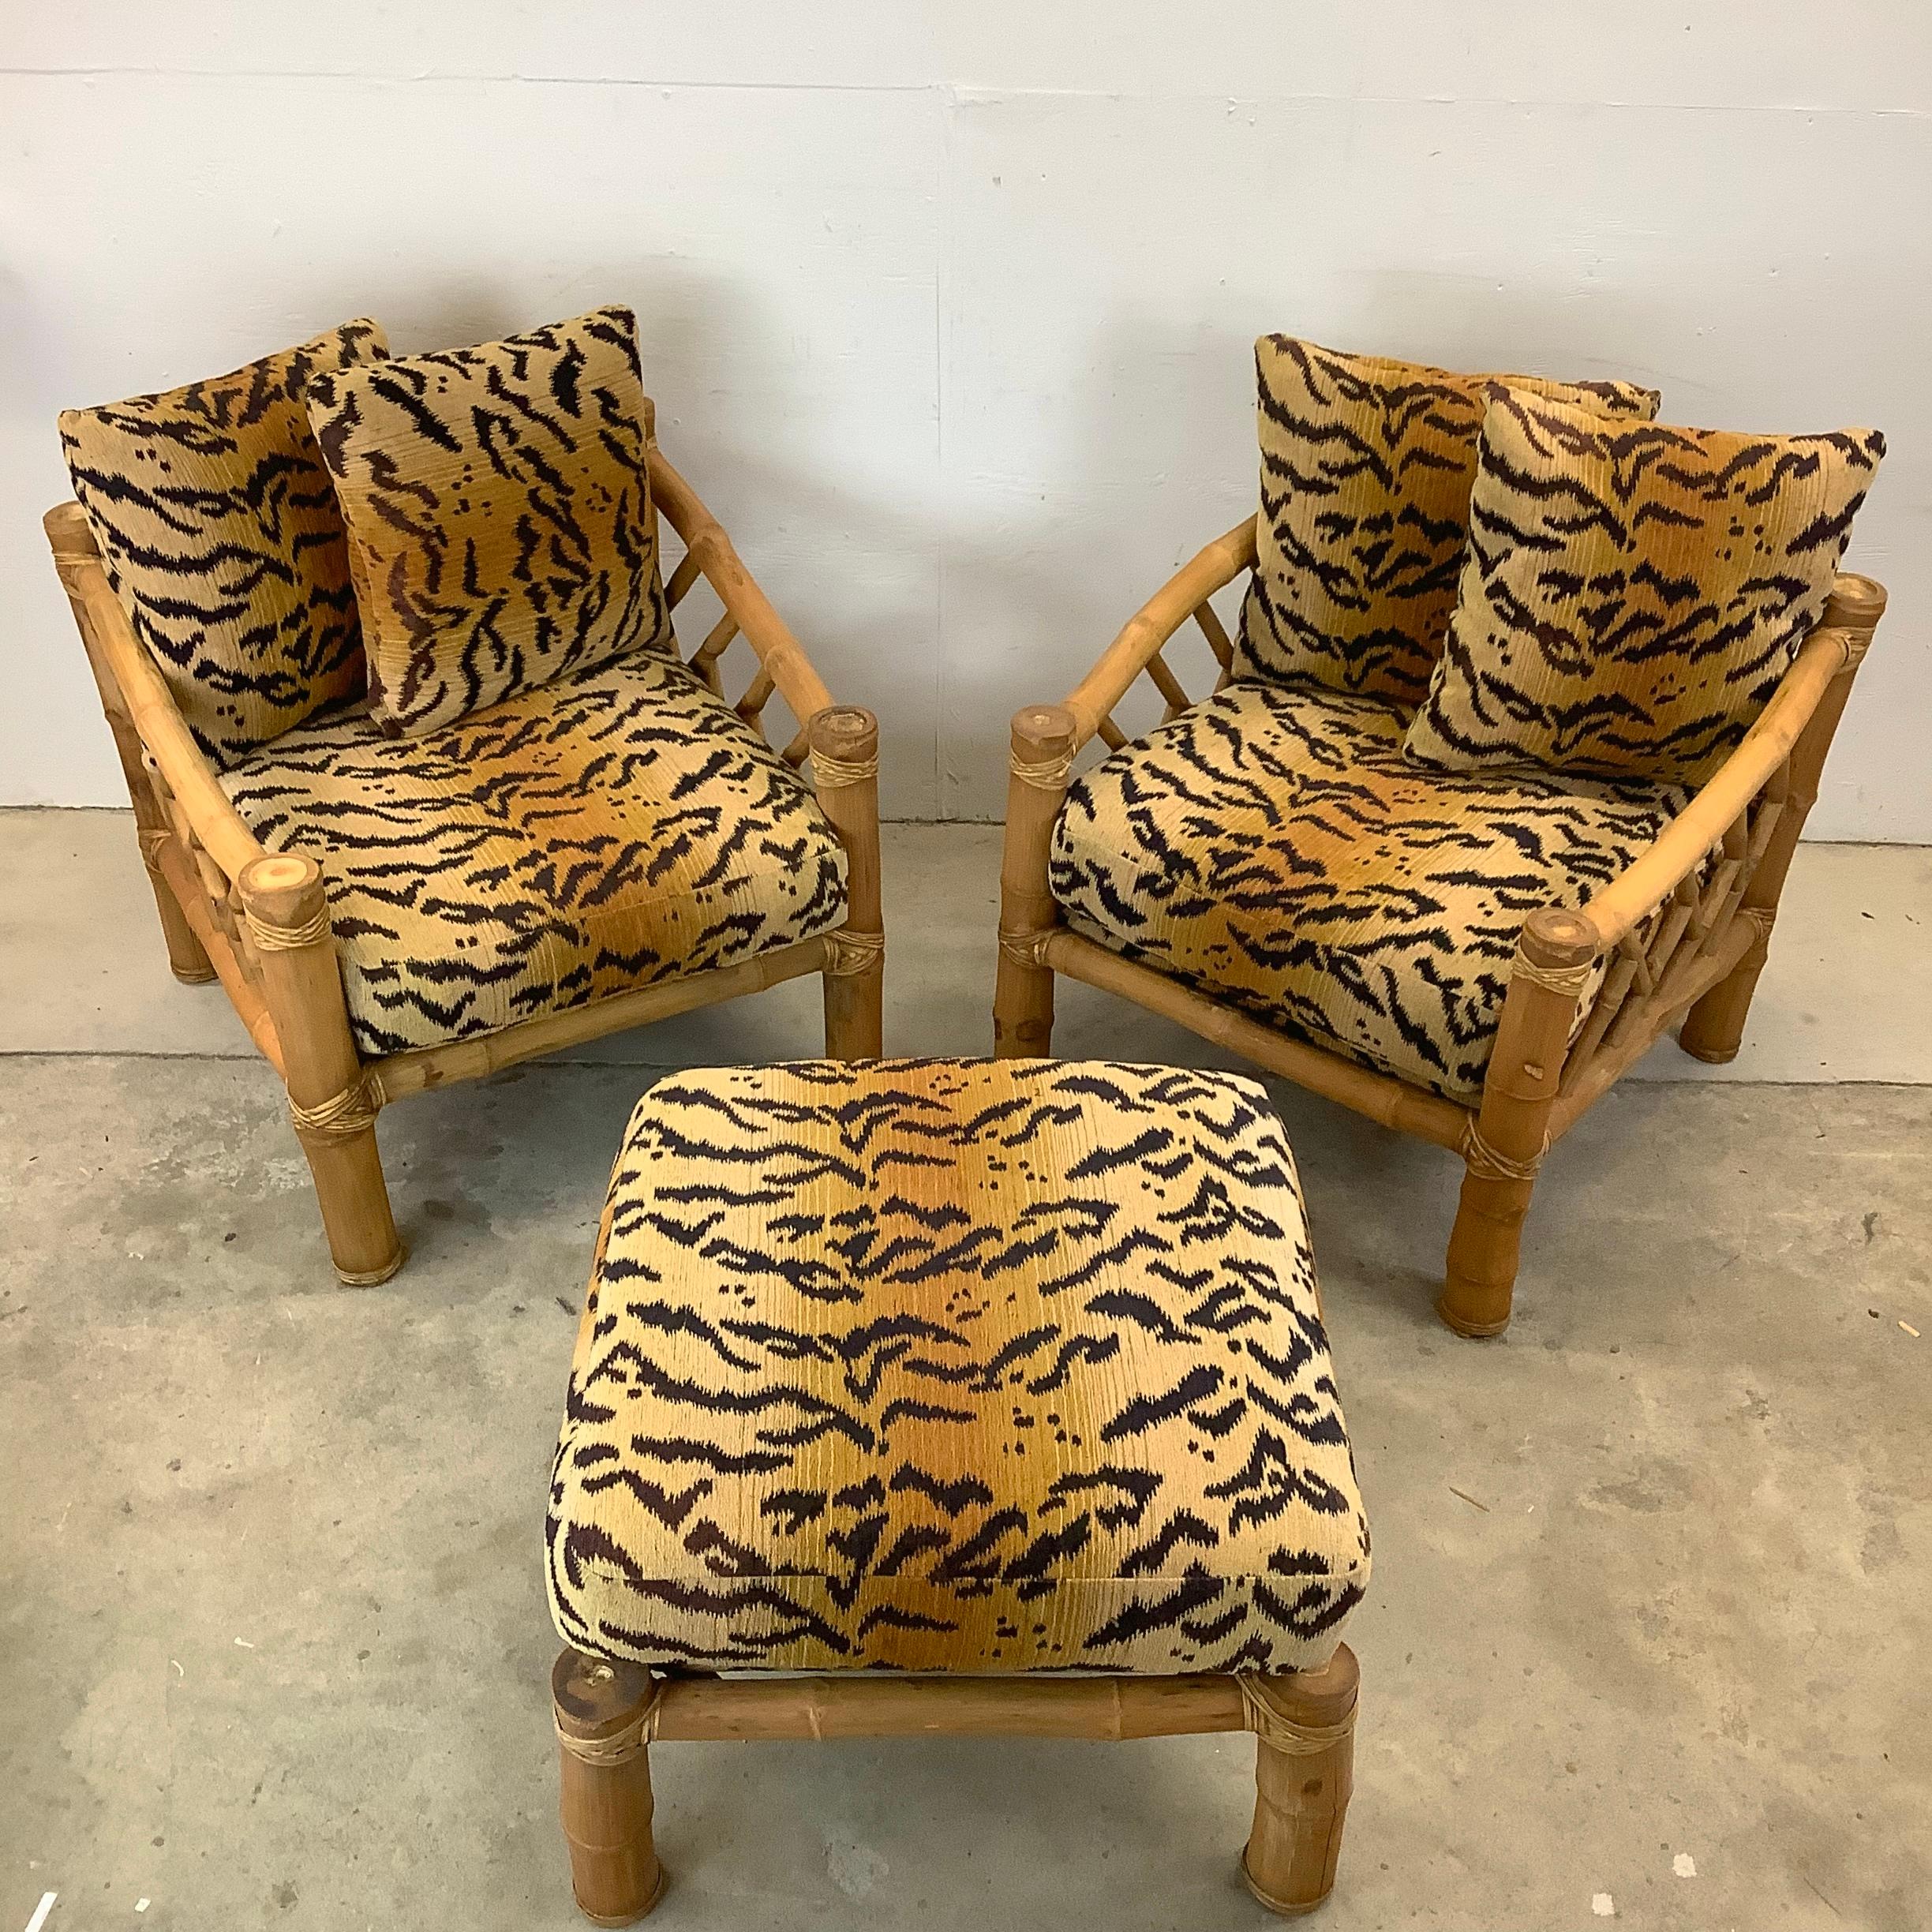 Bohemian Pair Vintage Bamboo Armchairs & Ottoman in Tiger Print